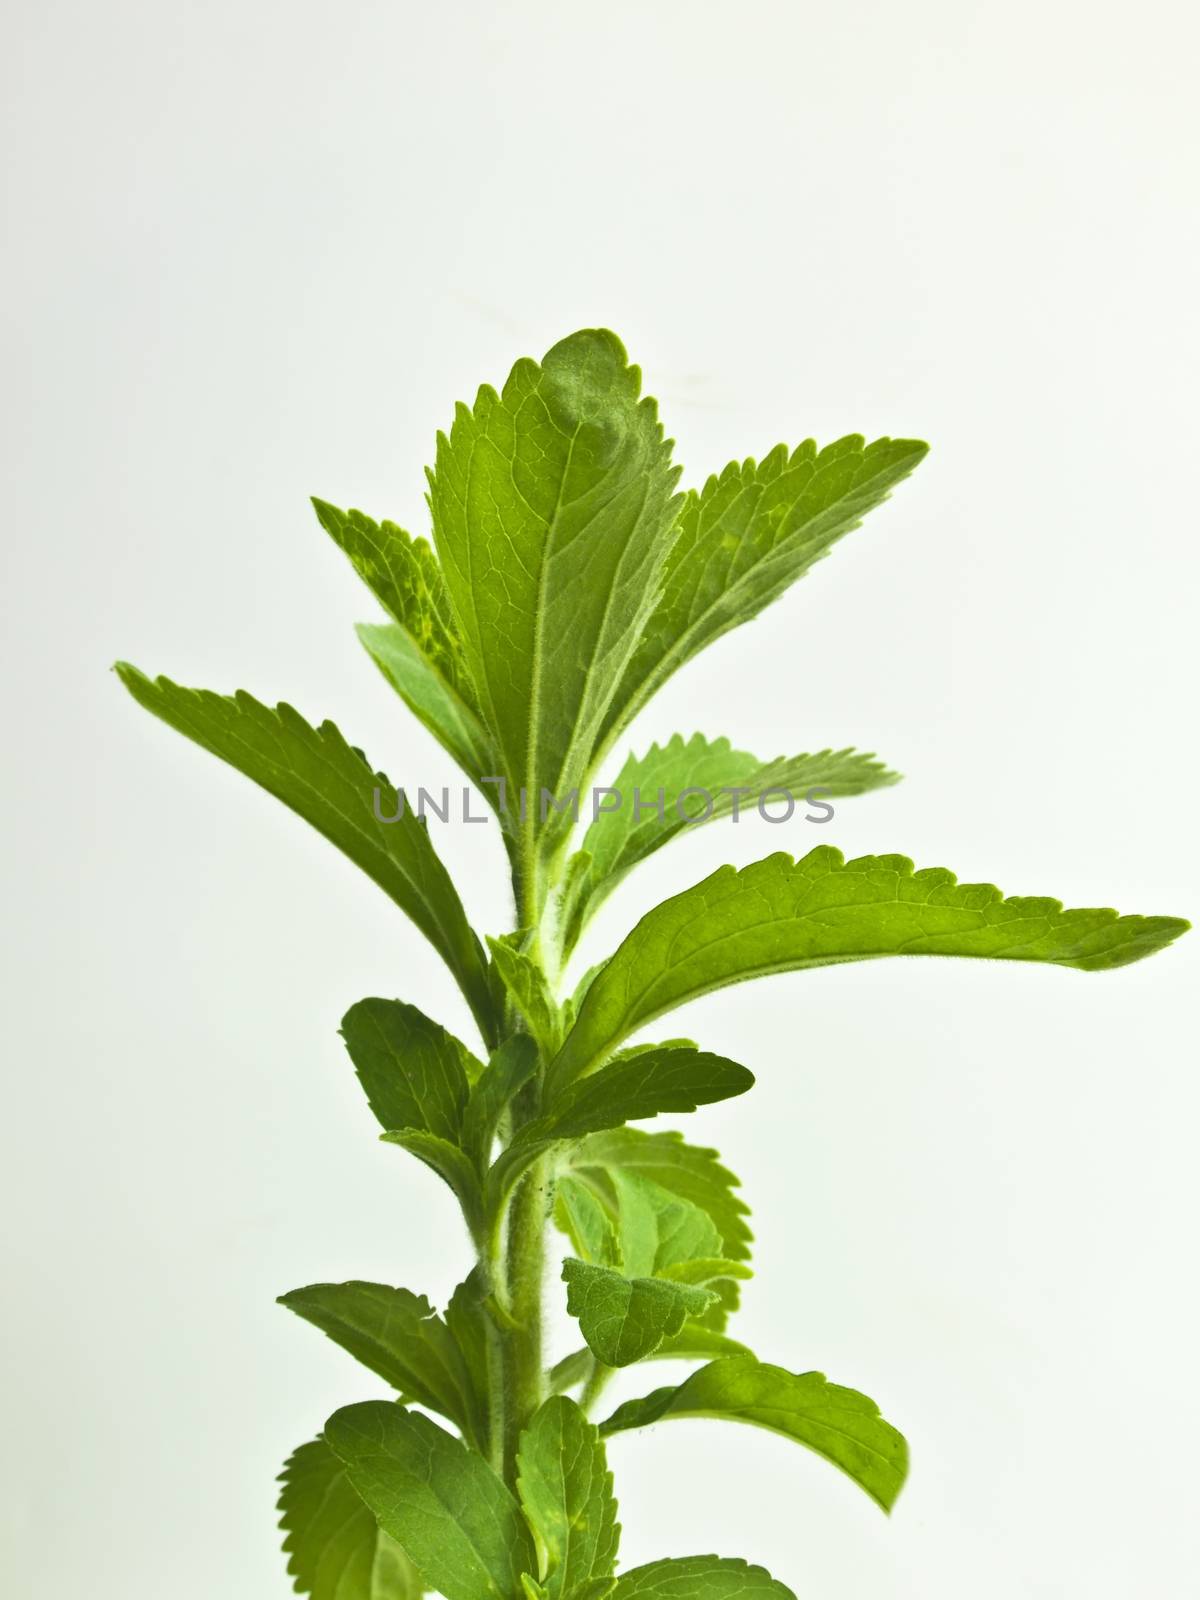 the support for sugar of the Stevia rebaudiana